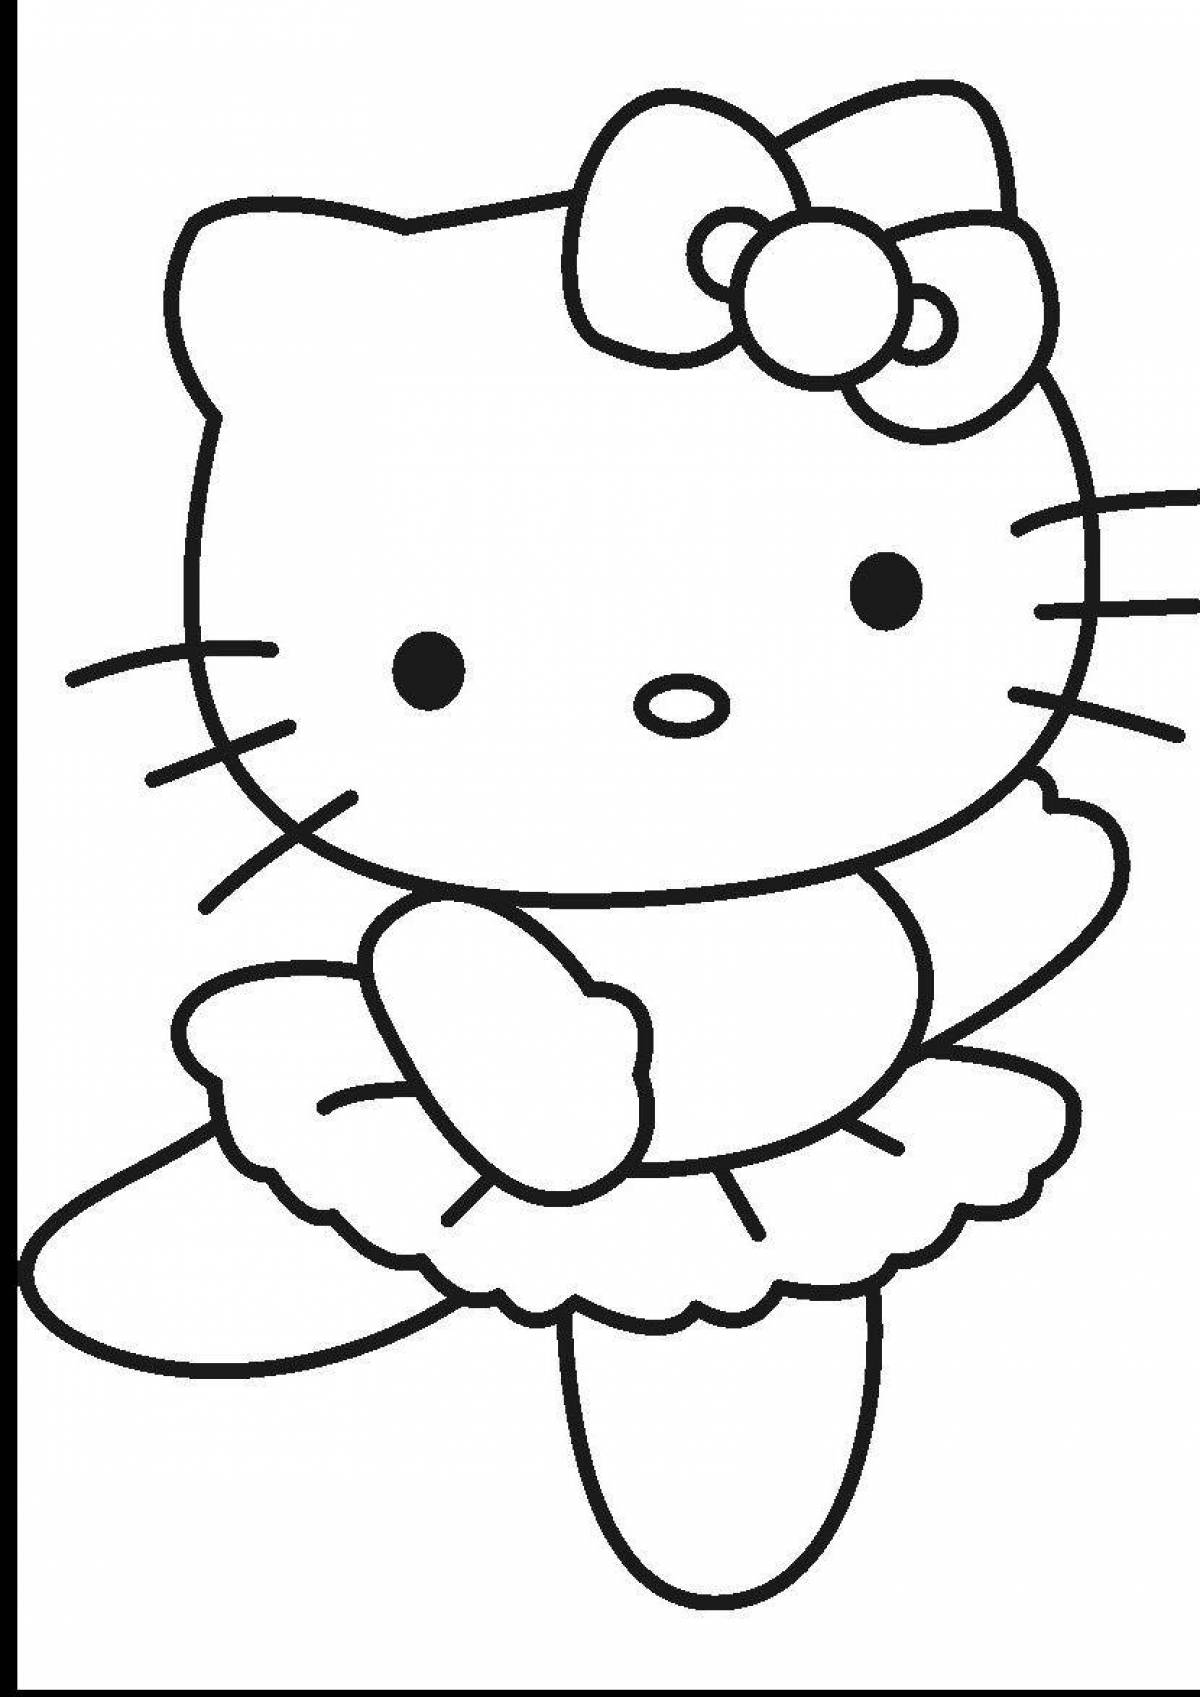 Violent easy coloring pages for girls